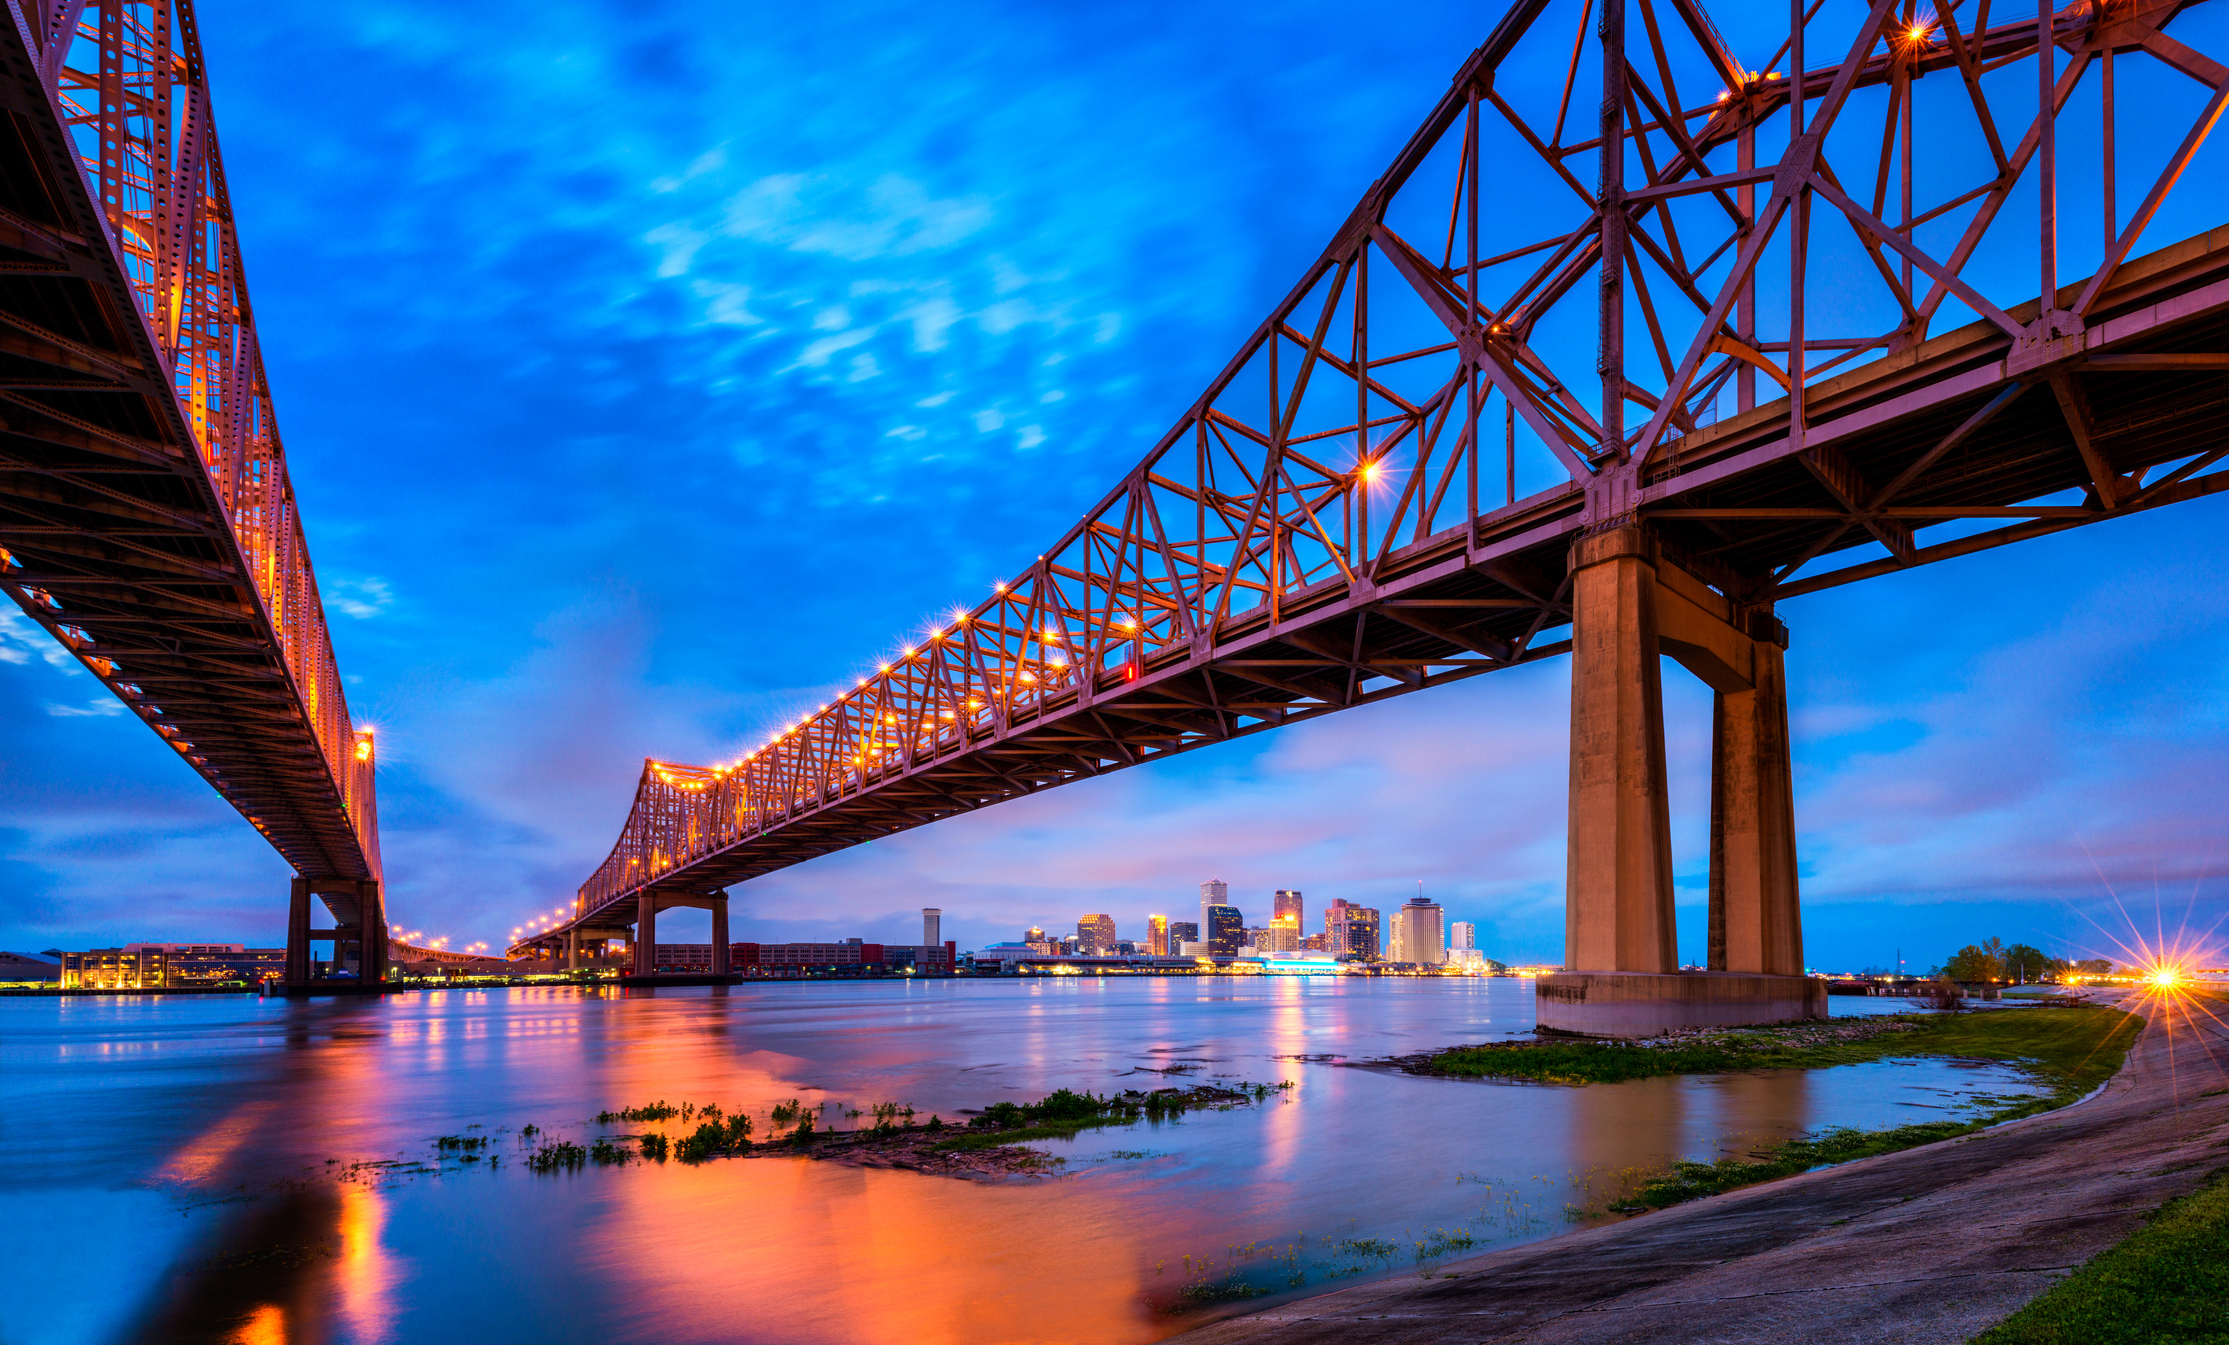 Skyline of New Orleans with Mississippi River and Crescent City Connection Bridge at Dusk, Louisiana, United States.